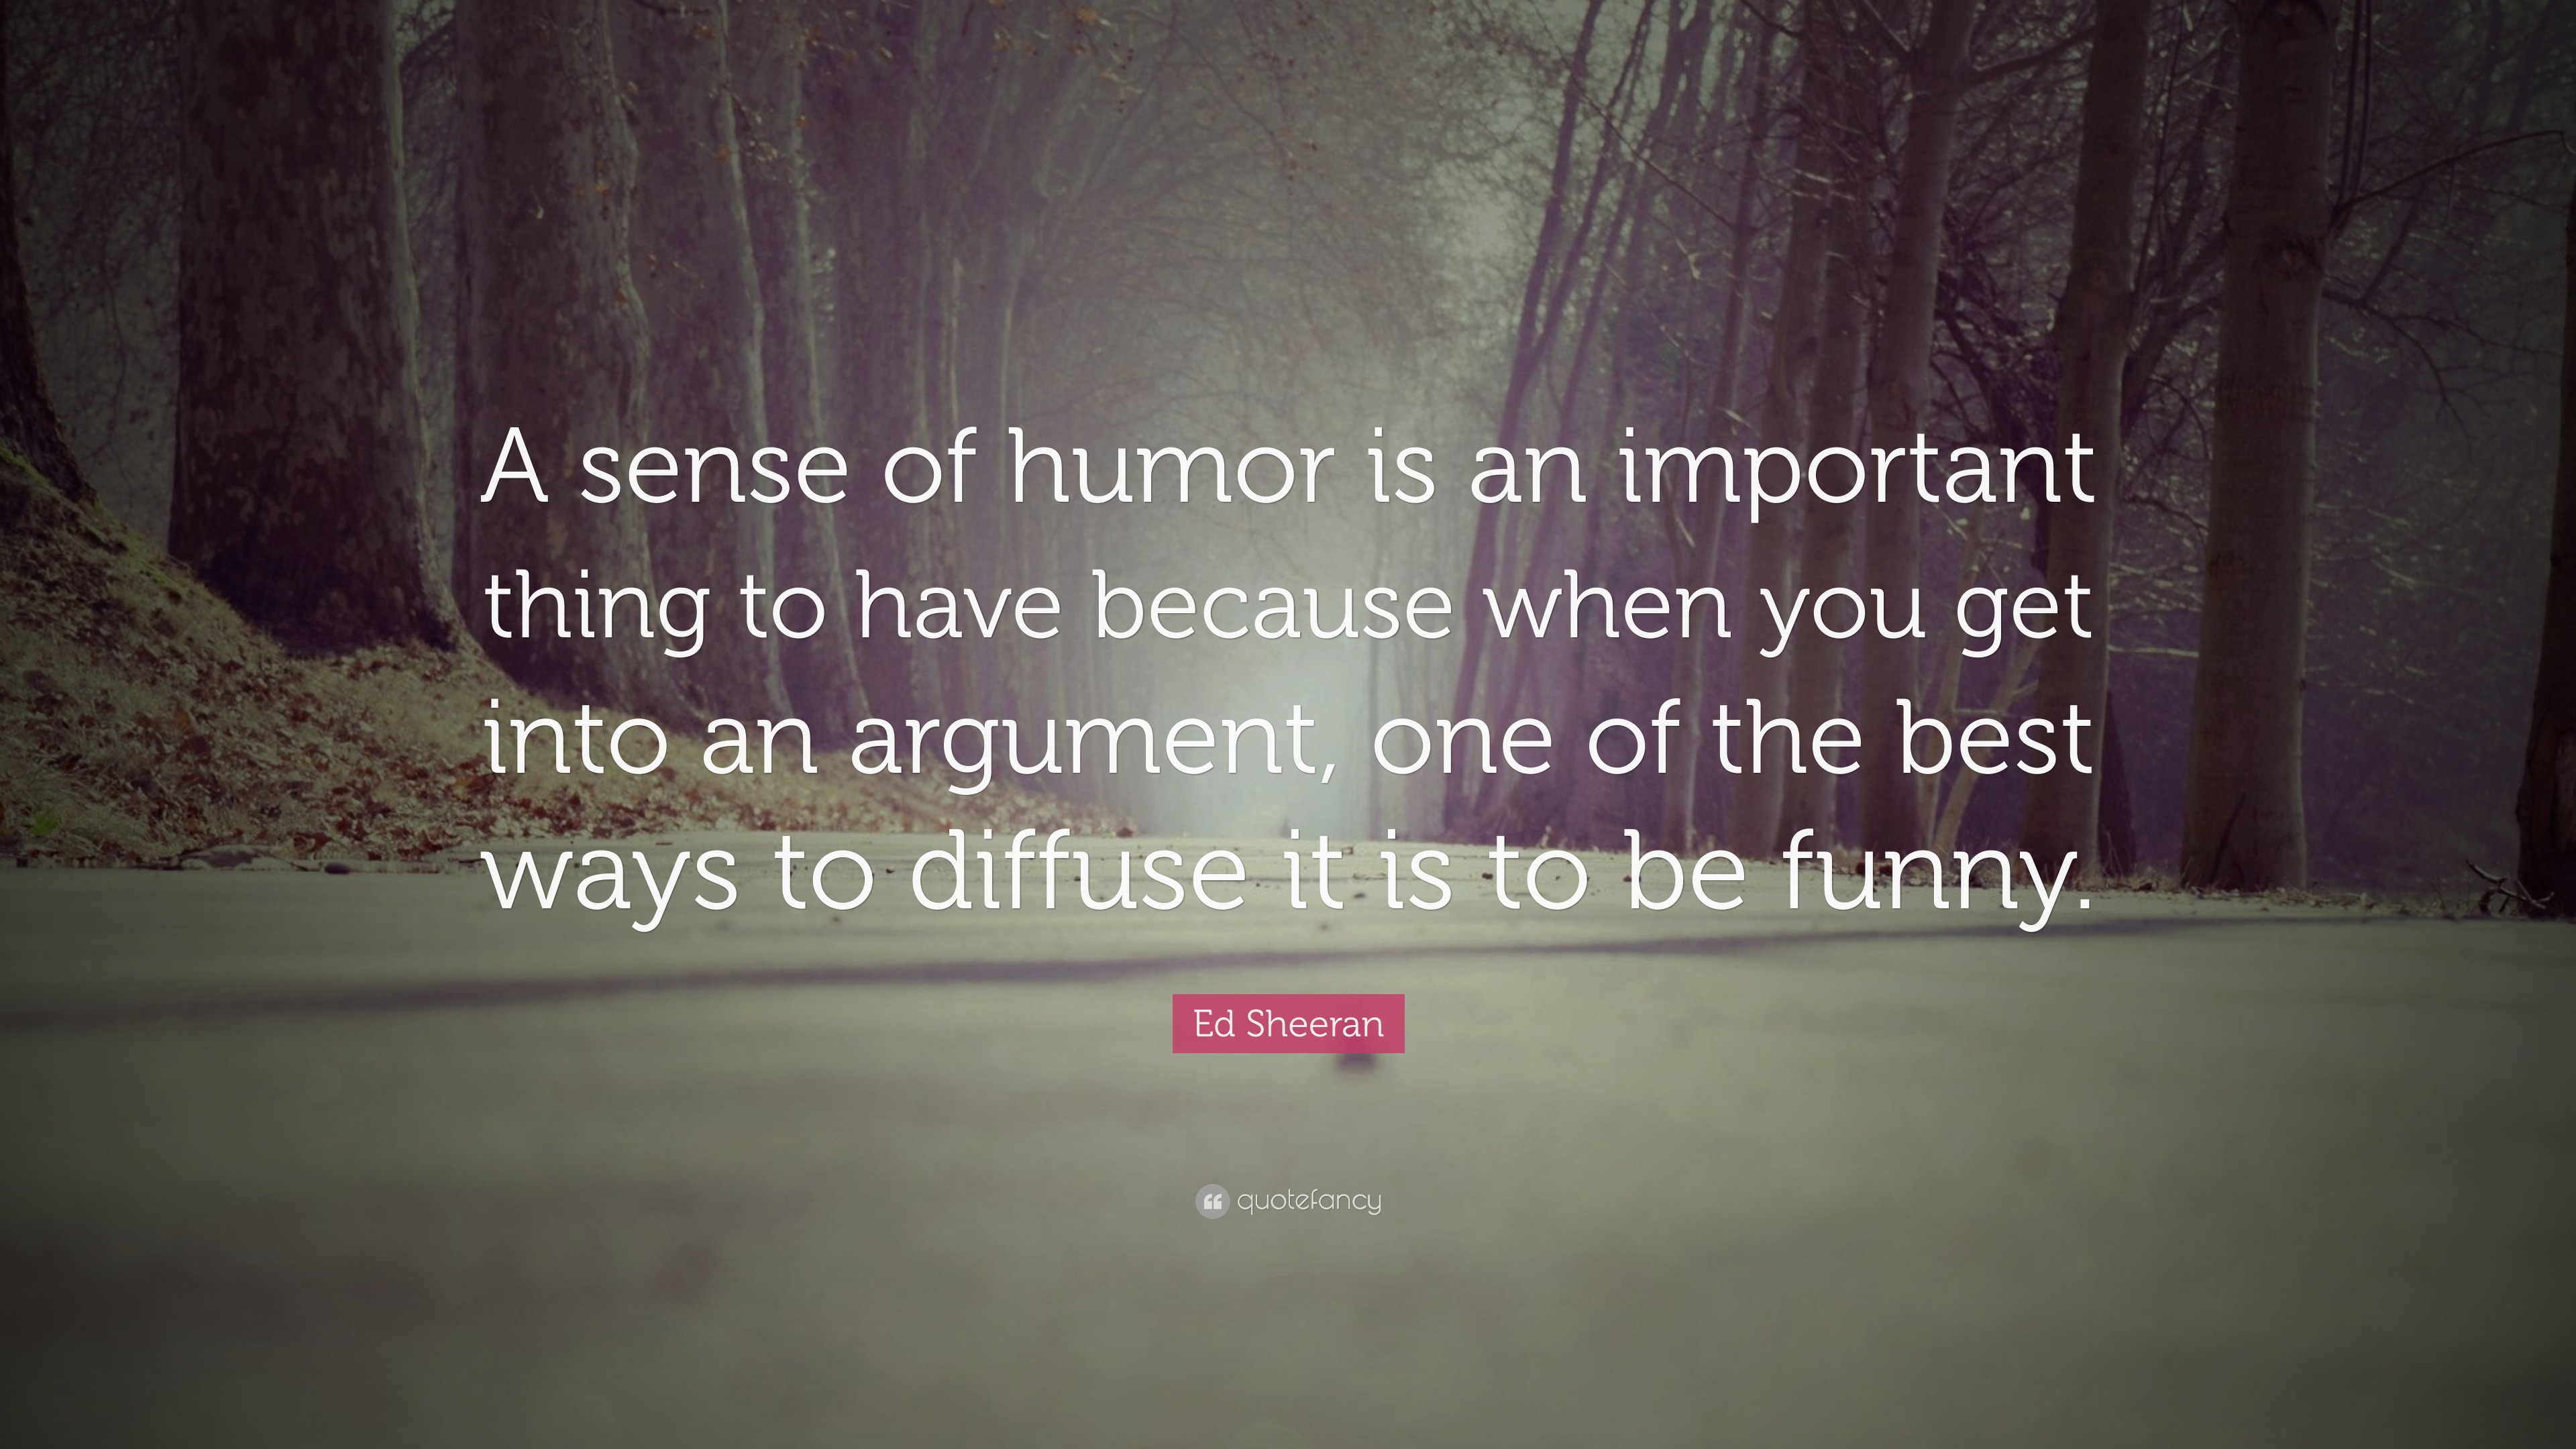 Ed Sheeran Quote: “A sense of humor is an important thing to have because  when you get into an argument, one of the best ways to diffuse it...”